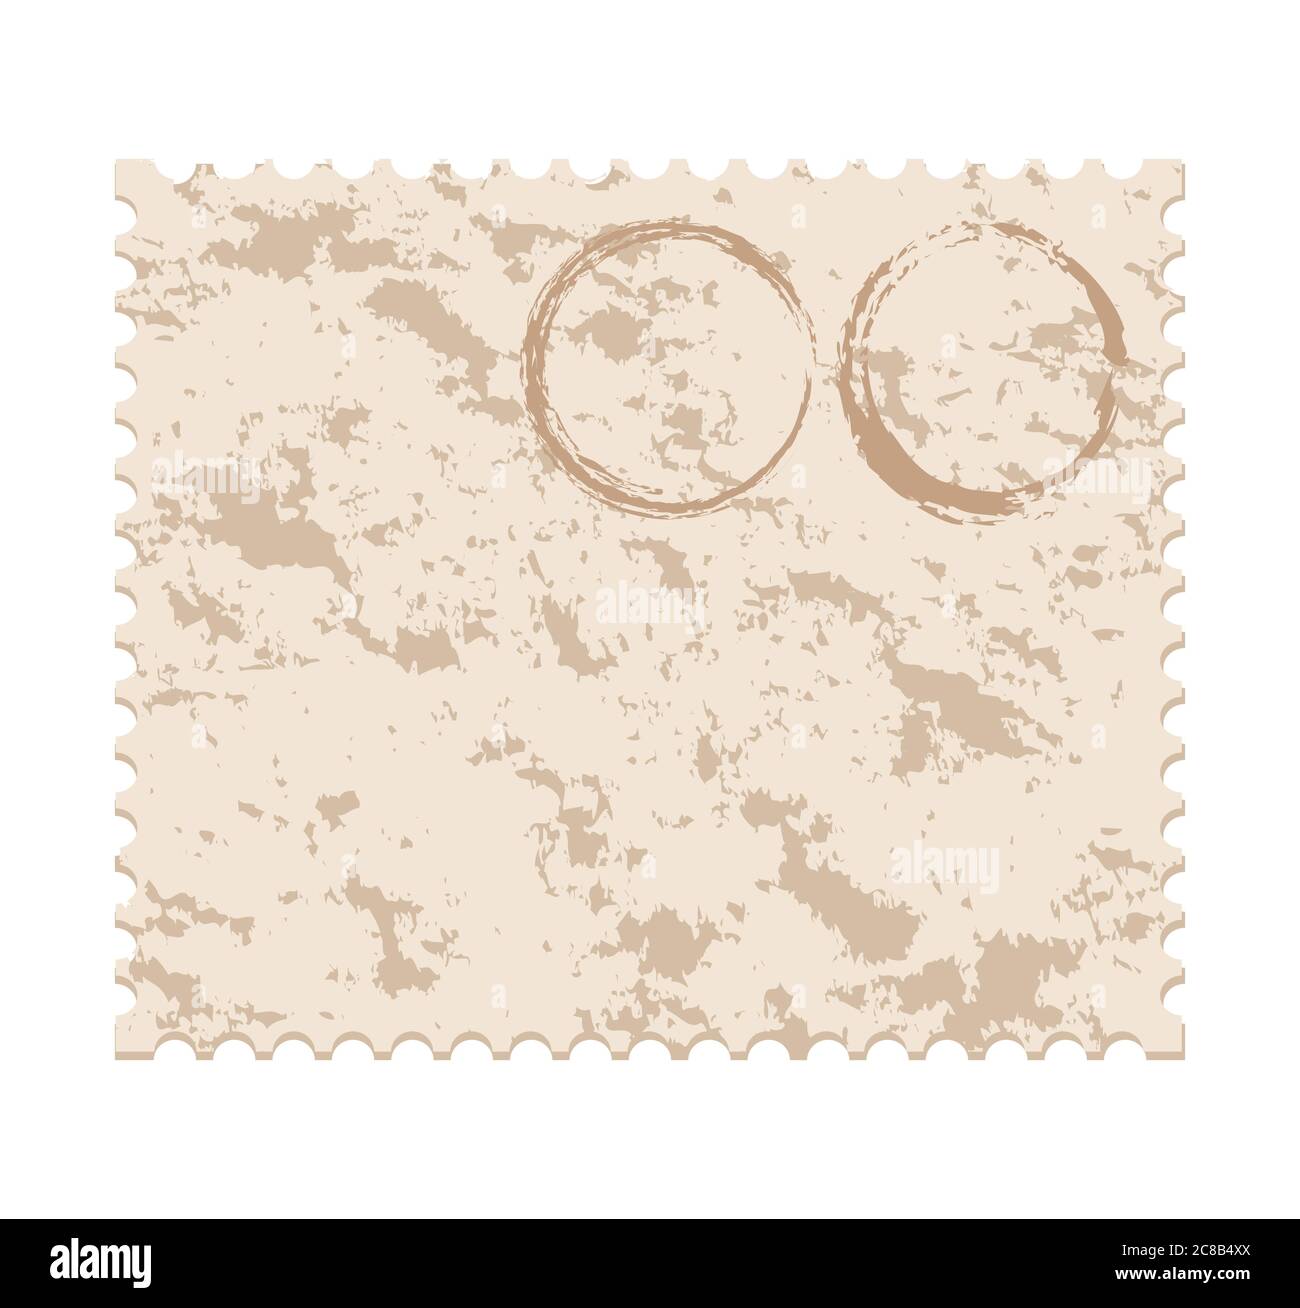 vector illustration of an old  blank grunge post stamp on white background Stock Vector